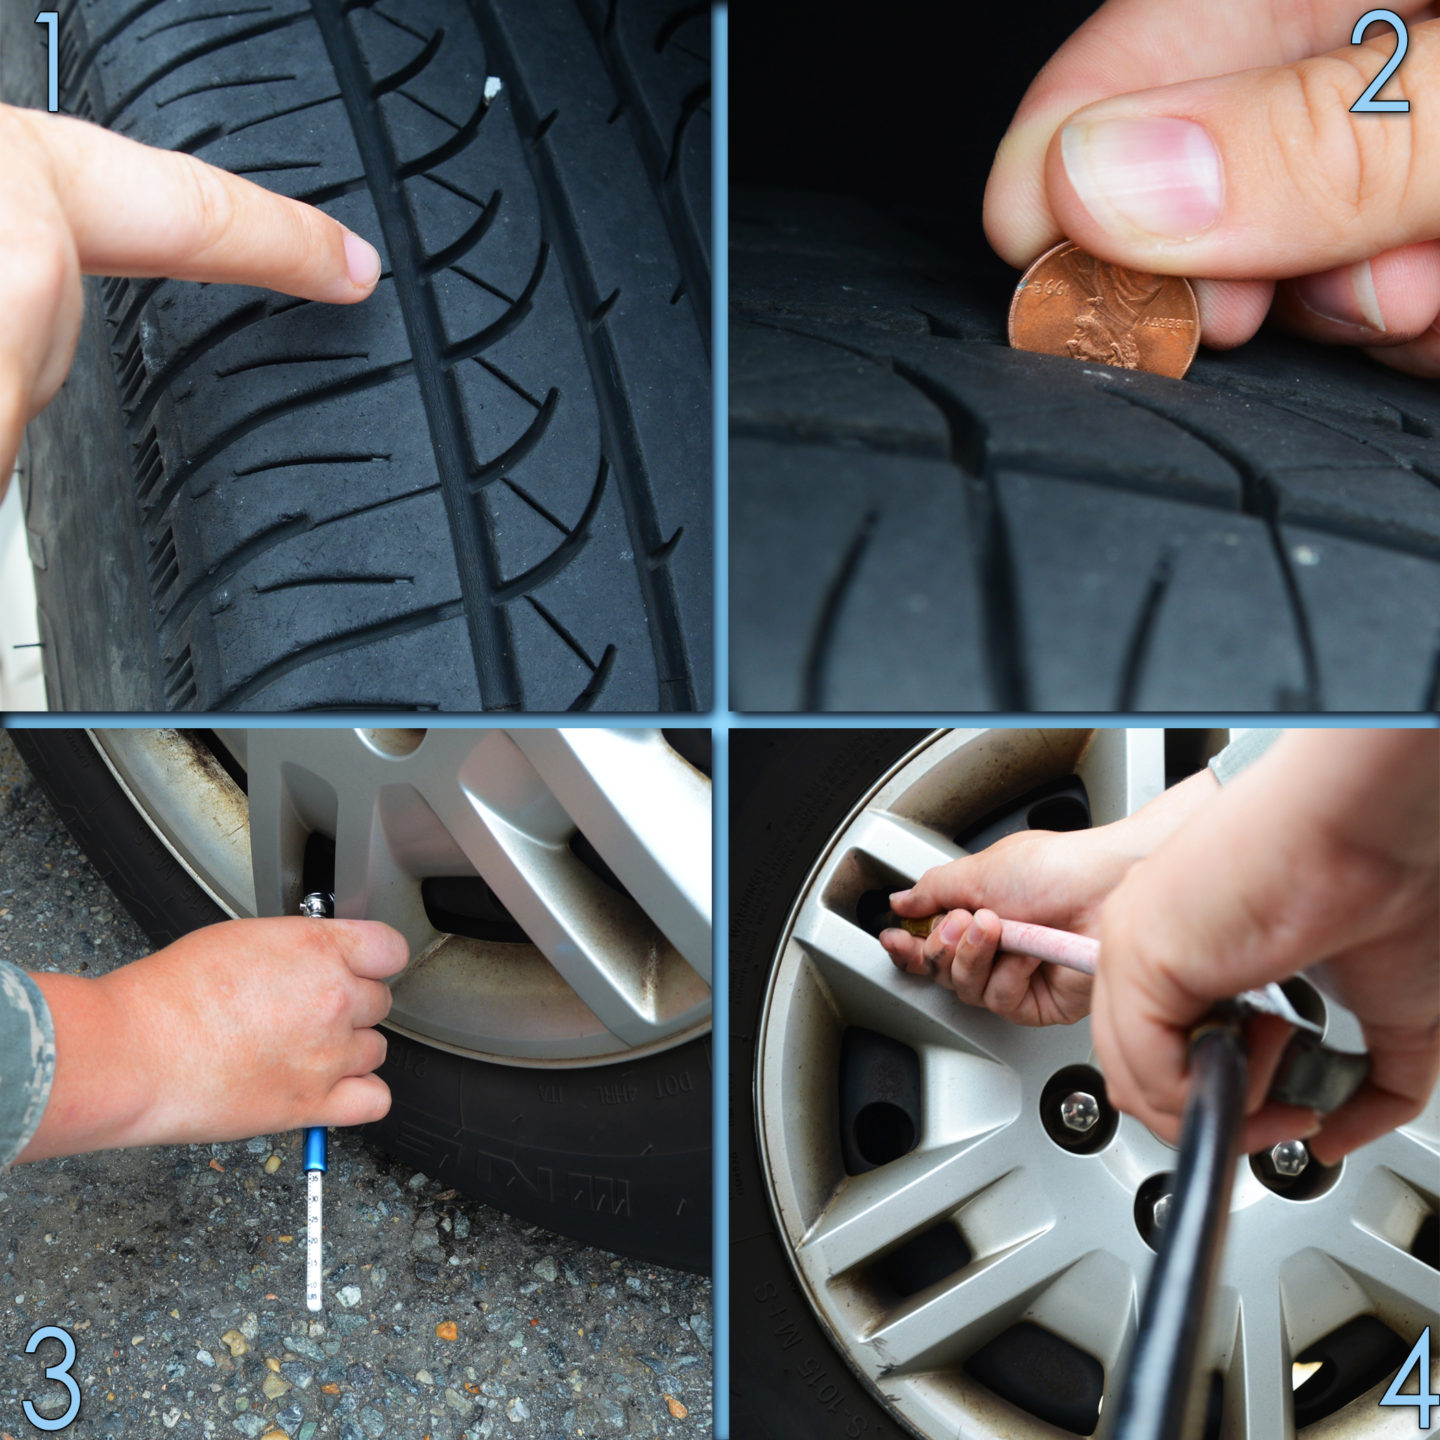 inflating tire for better fuel economy and gas mileage 20 tips to saving money in 2020